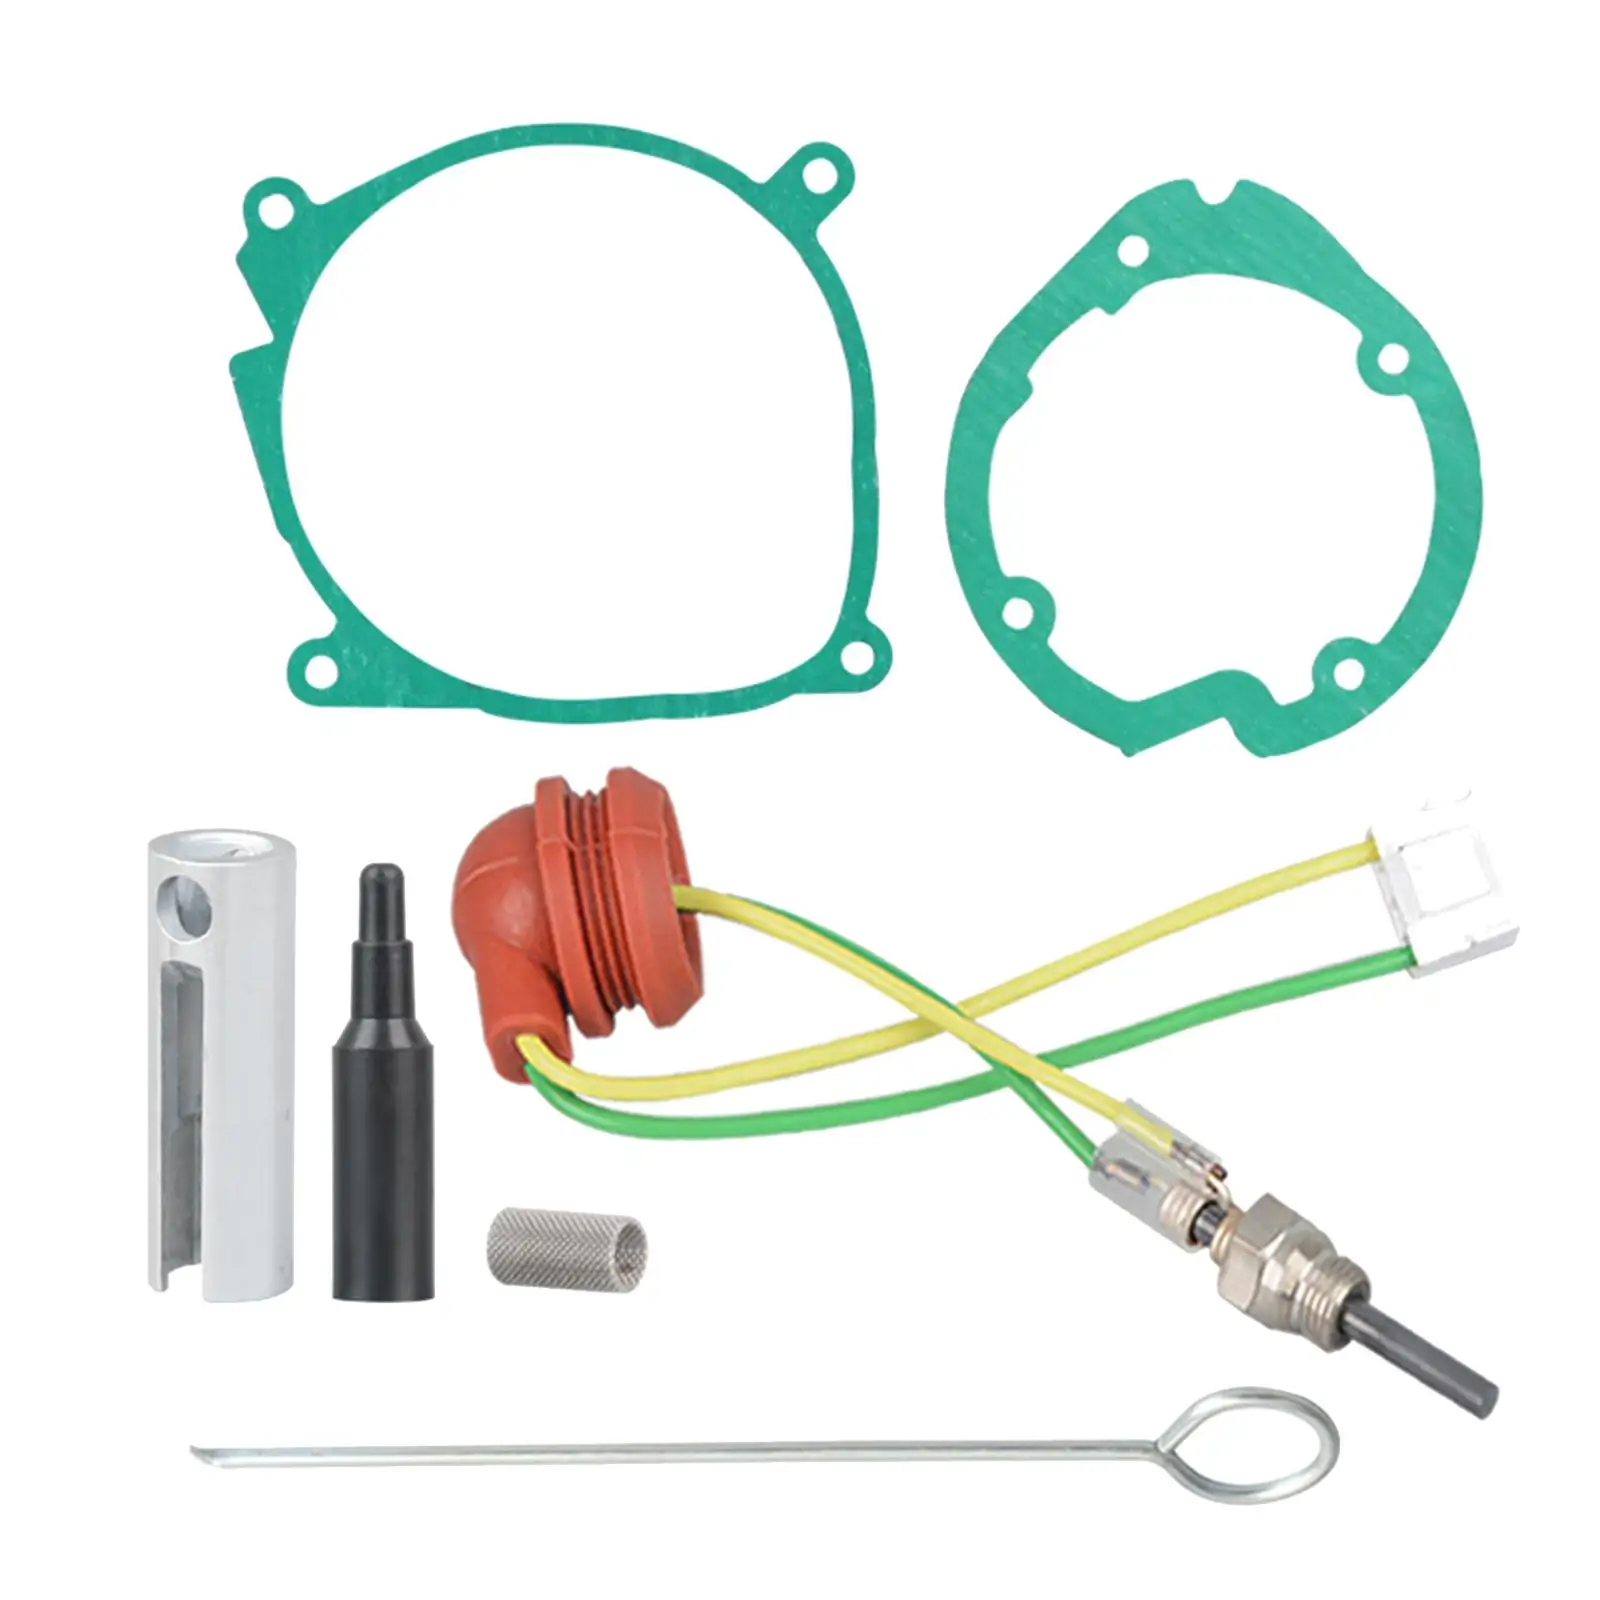 Glow Plug Repair Kit Auto Spare Parts Direct Replaces Accessory Maintenance Supplies Gasket Net for 24V 5kW Parking Heater